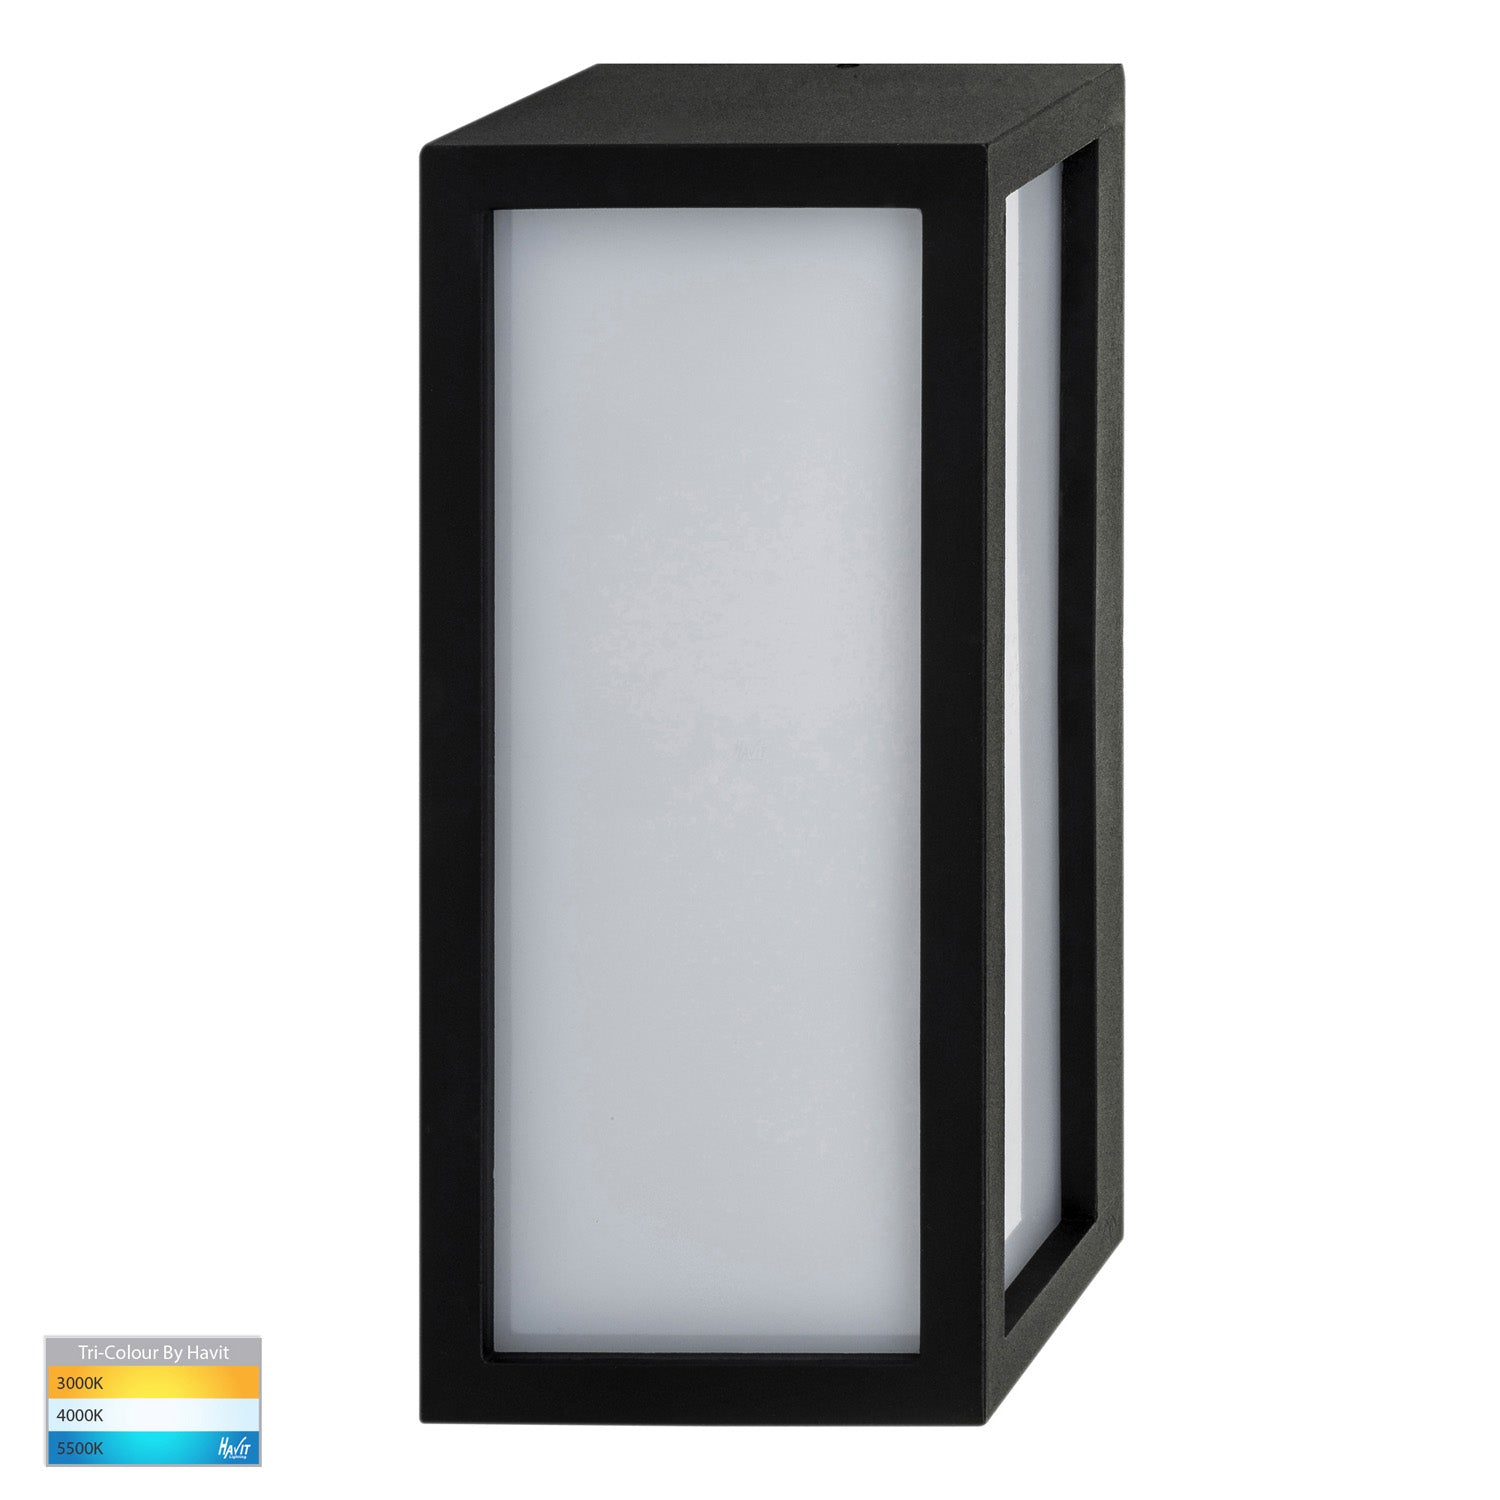 LED Outdoor Wall Light 12w in Black or White Havit Lighting - HV3669T - Mases LightingHavit Lighting